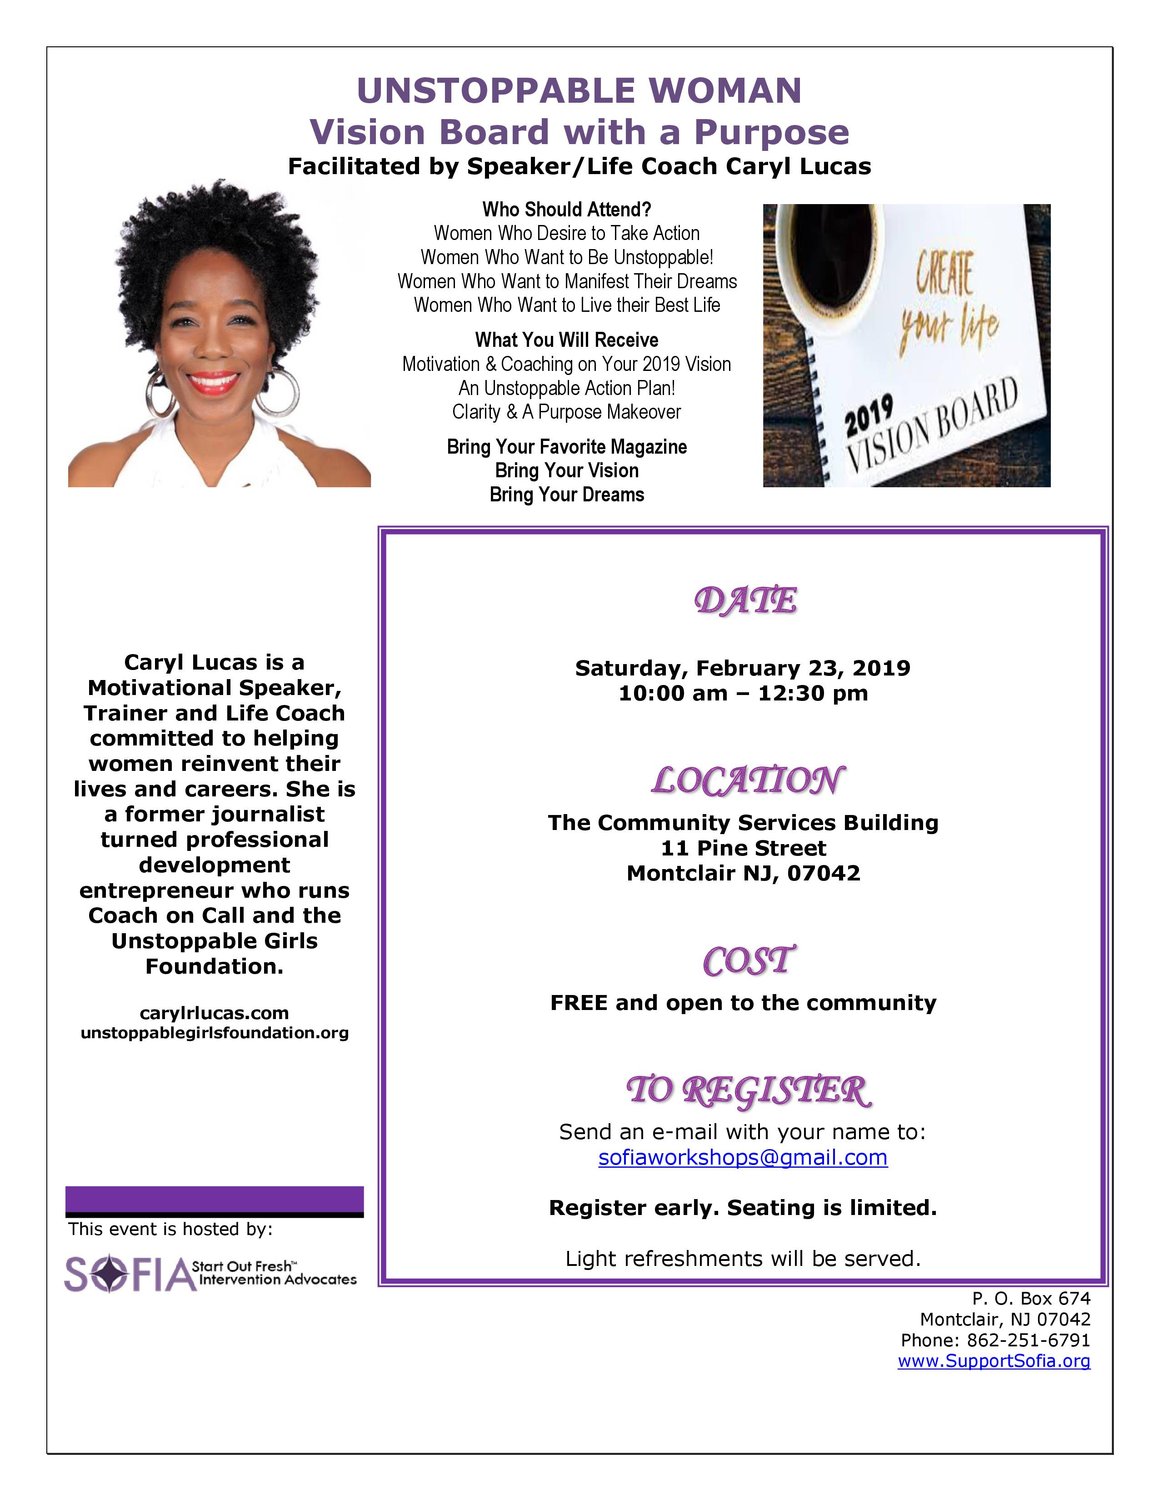 S.O.F.I.A. Free Women's Empowerment Workshop - UNSTOPPABLE WOMAN ...